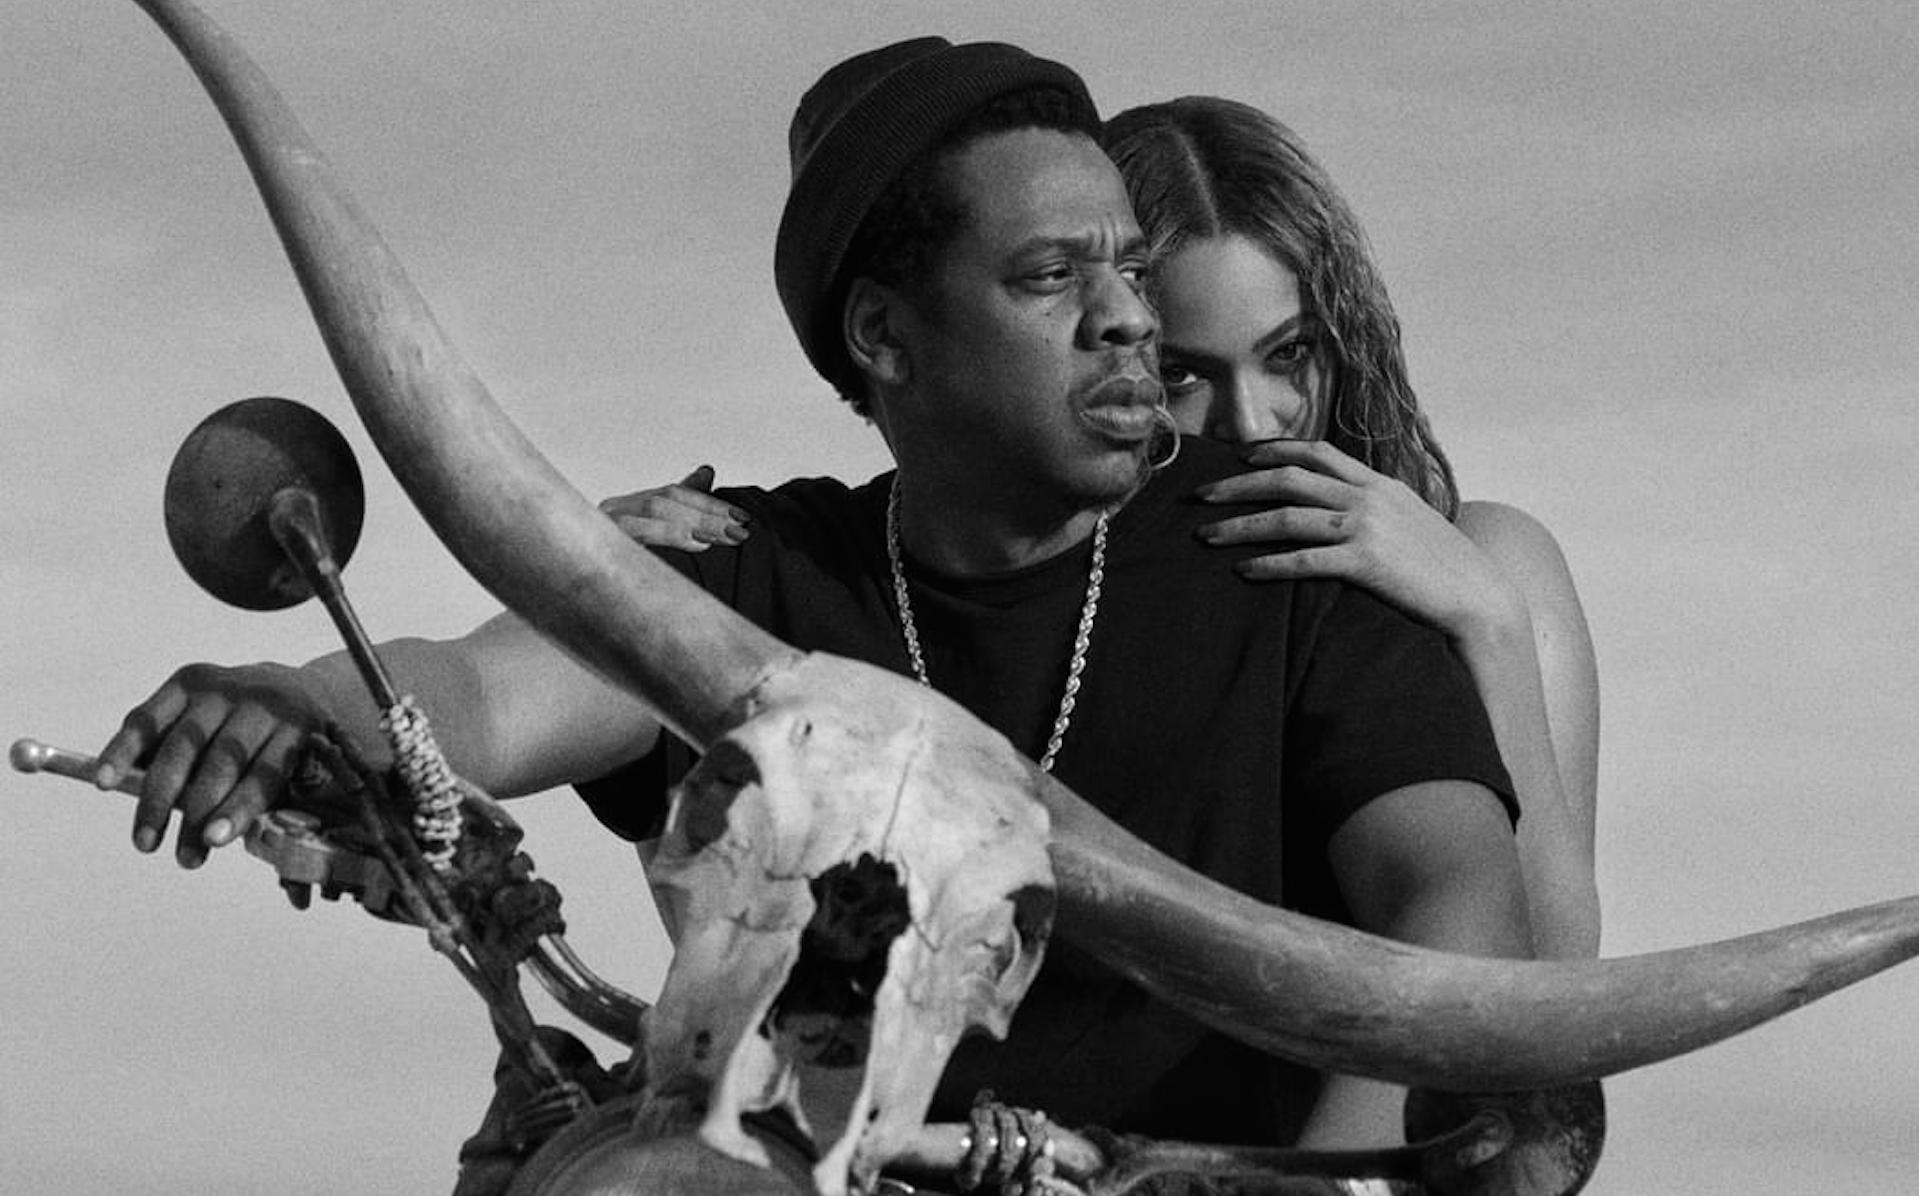 Julymilan Sex - BeyoncÃ©/Jay-Z tour tickets go on sale this week: When are On The ...